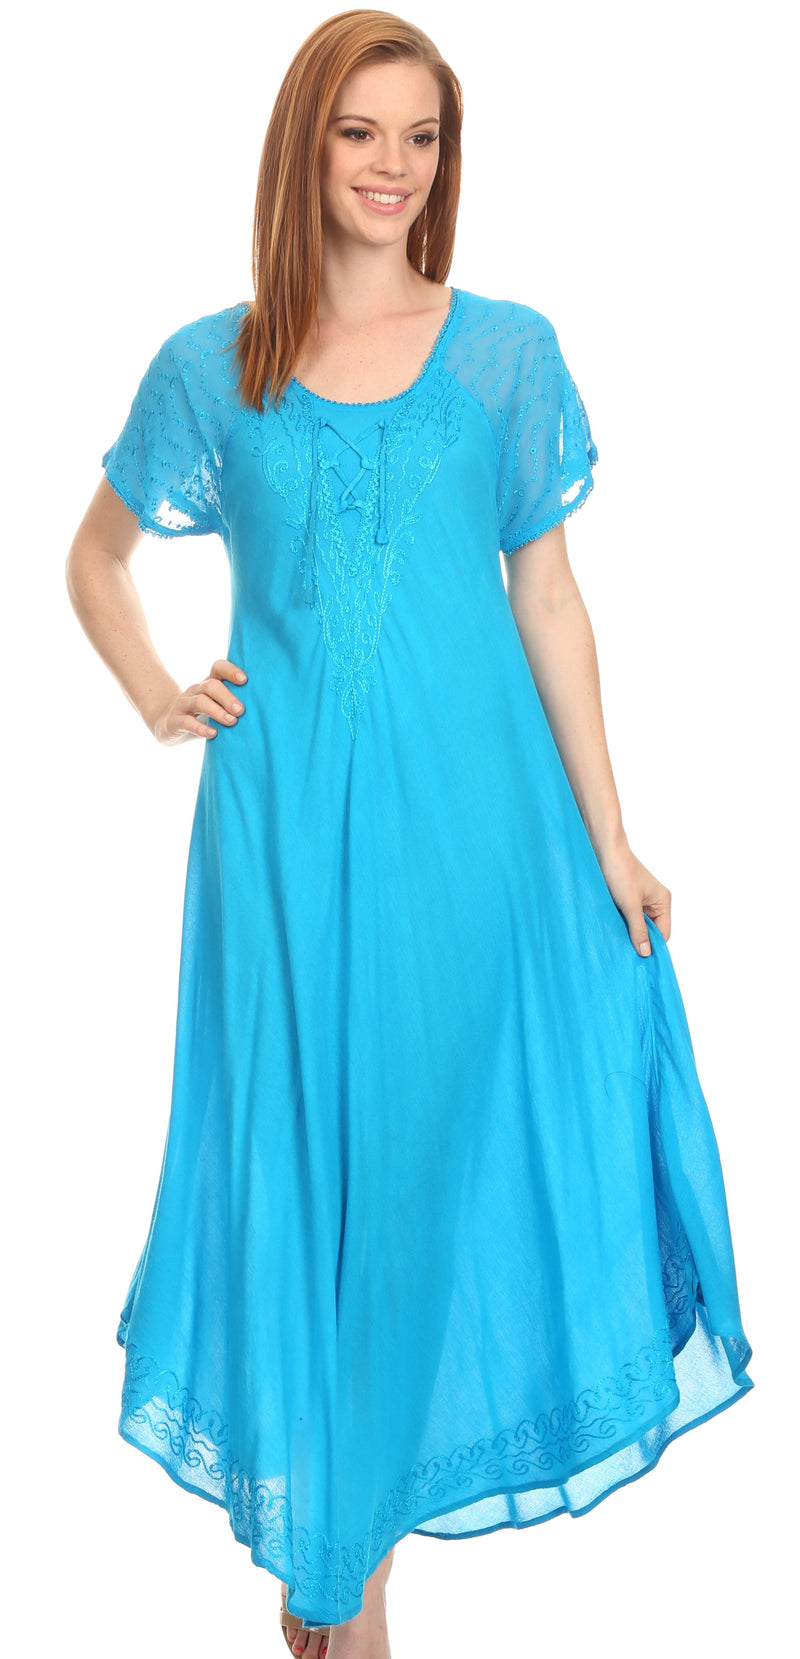 Sakkas Shasta Lace Embroidered Cap Sleeves Long Caftan Dress / Cover Up